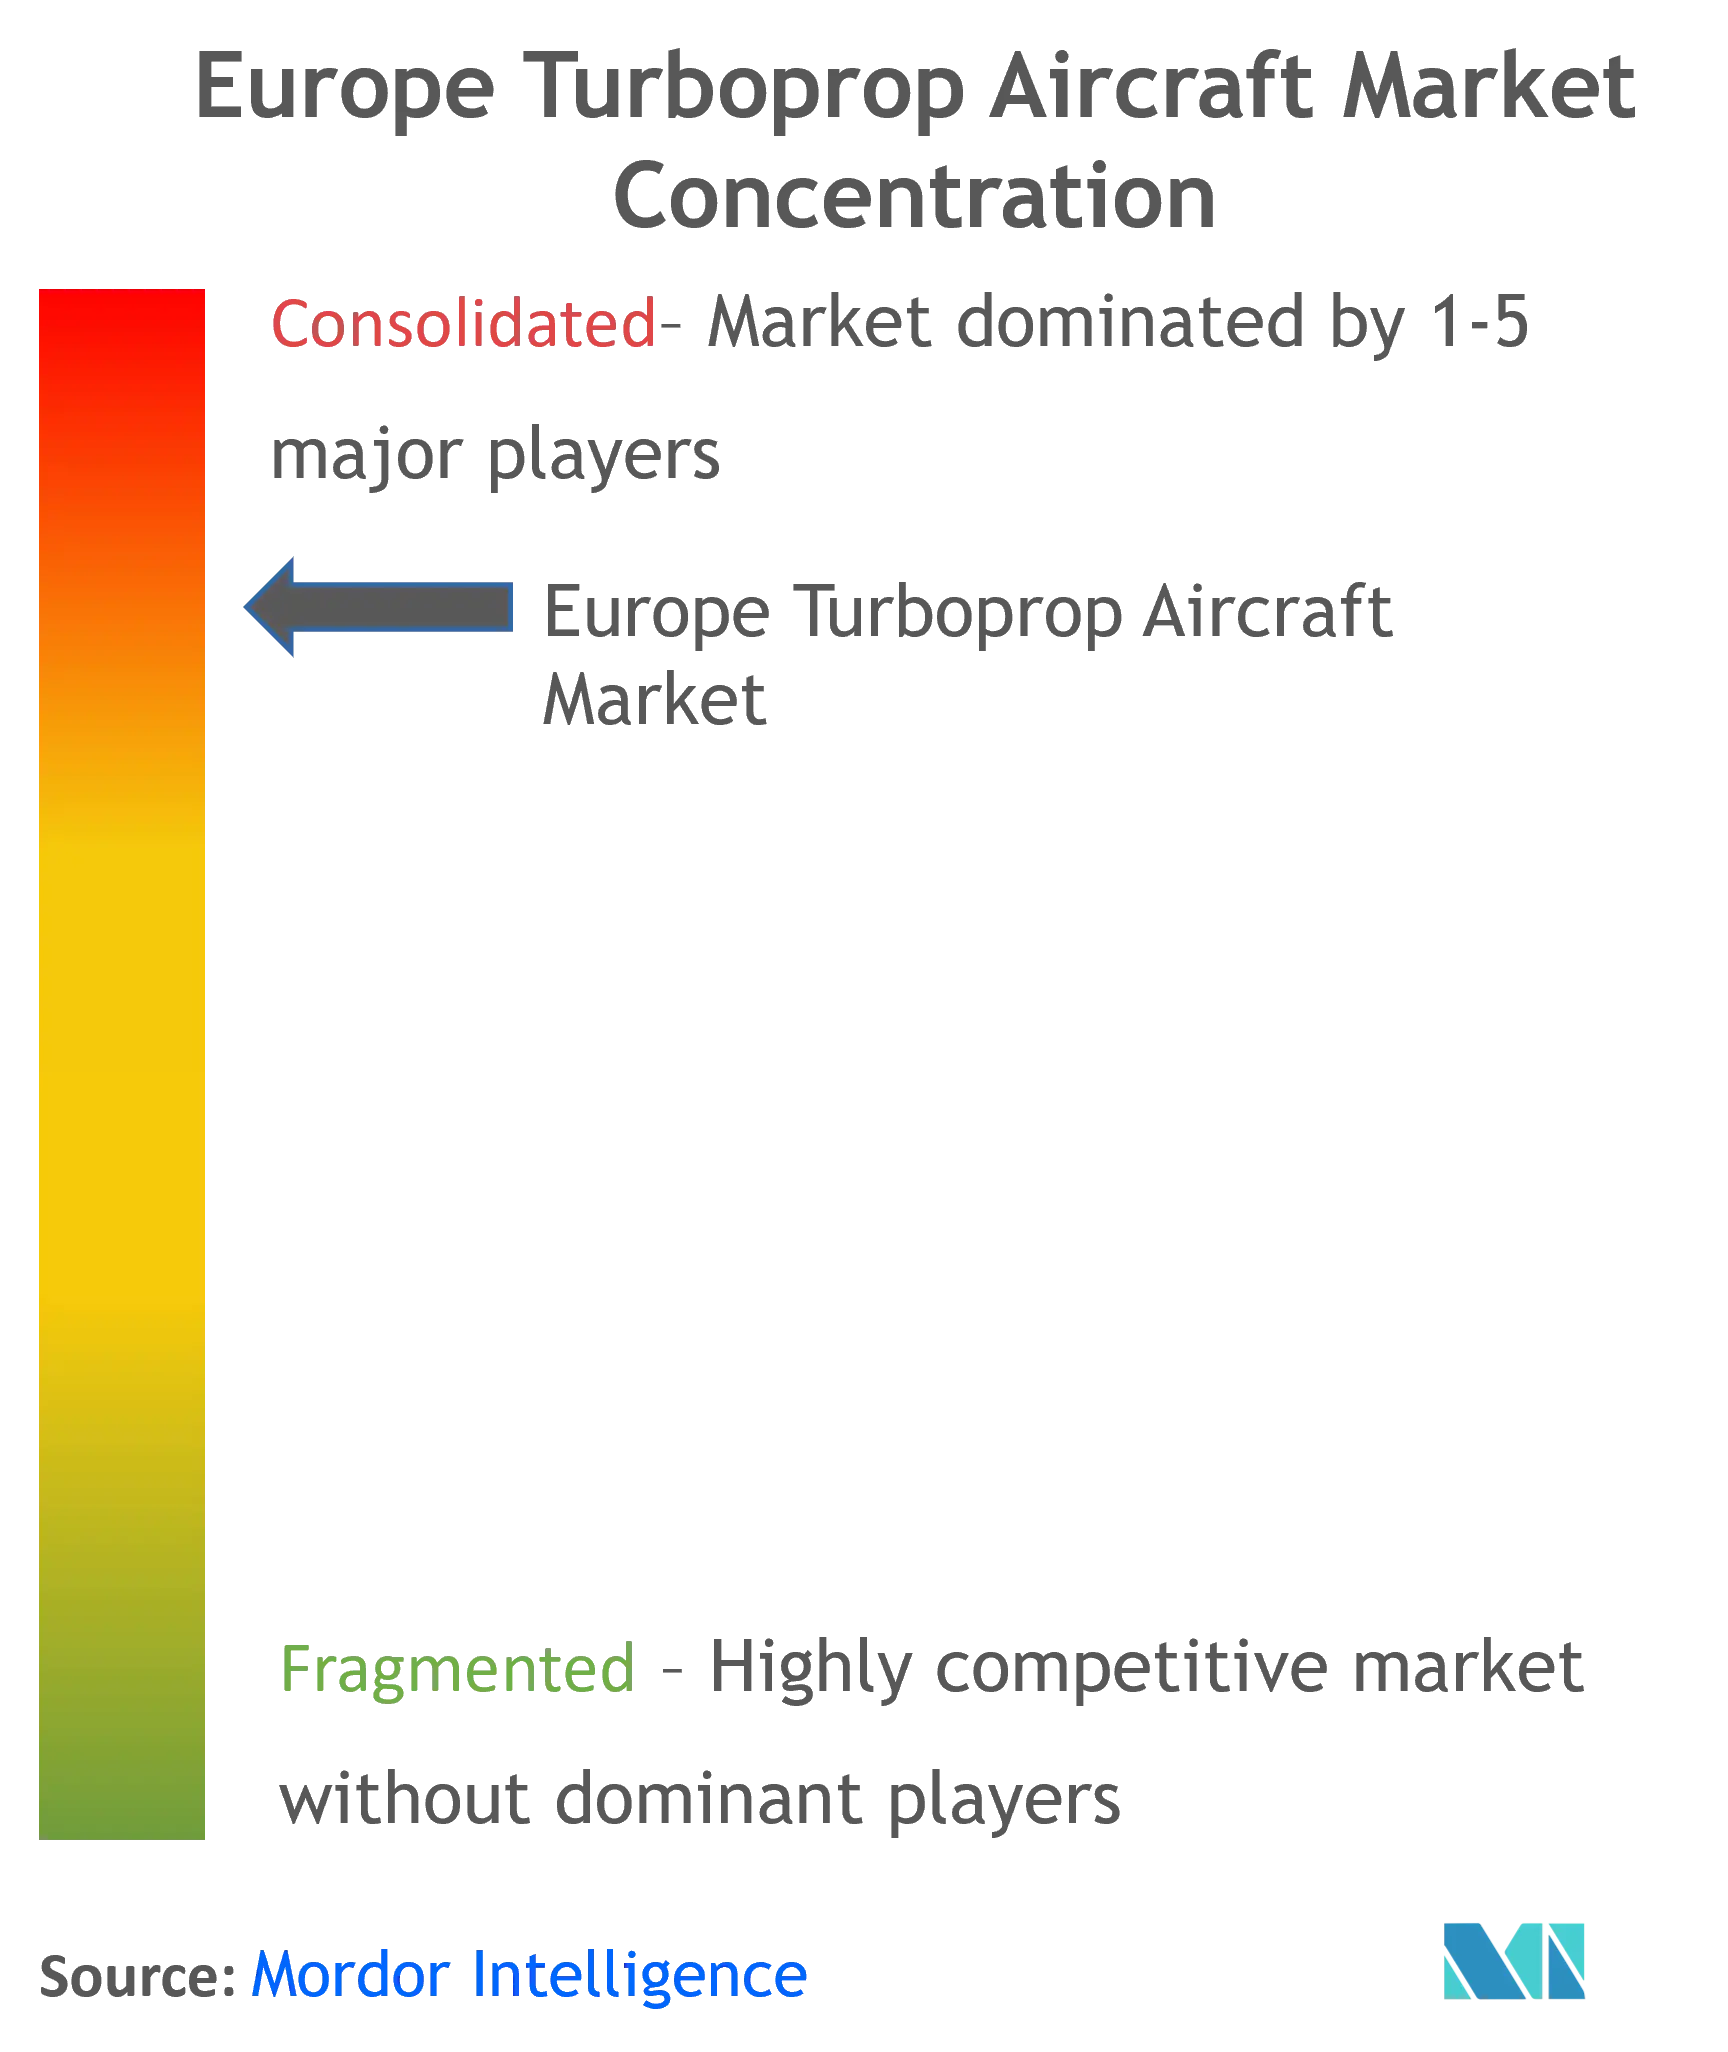 Europe Turboprop Aircraft Market Concentration